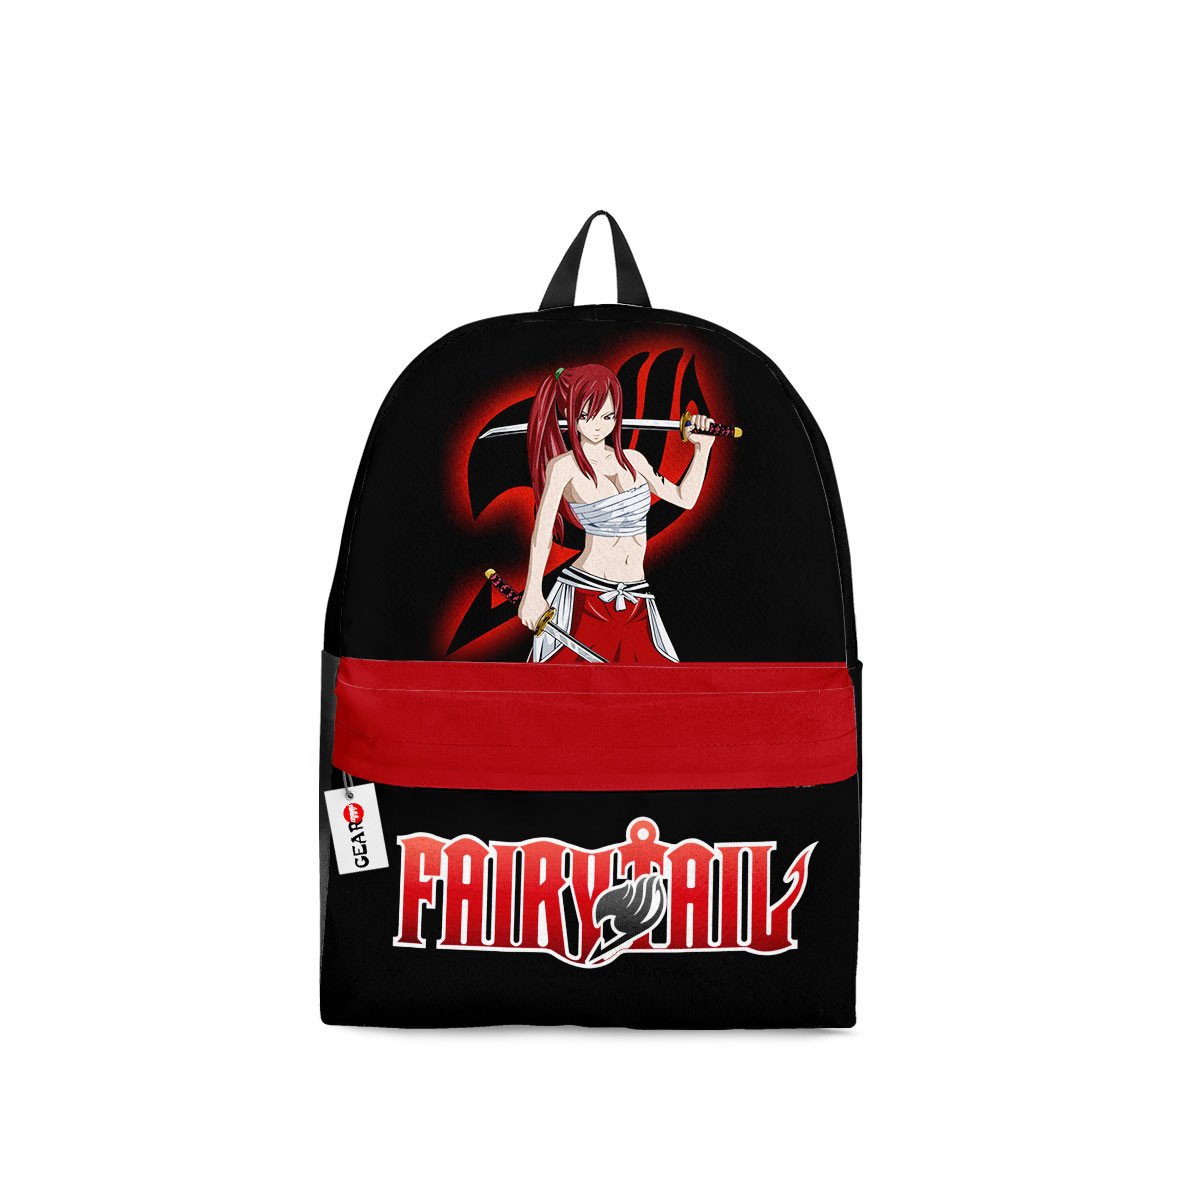 BEST Erza Scarlet Fairy Tail Anime Printed 3D Leisure Backpack